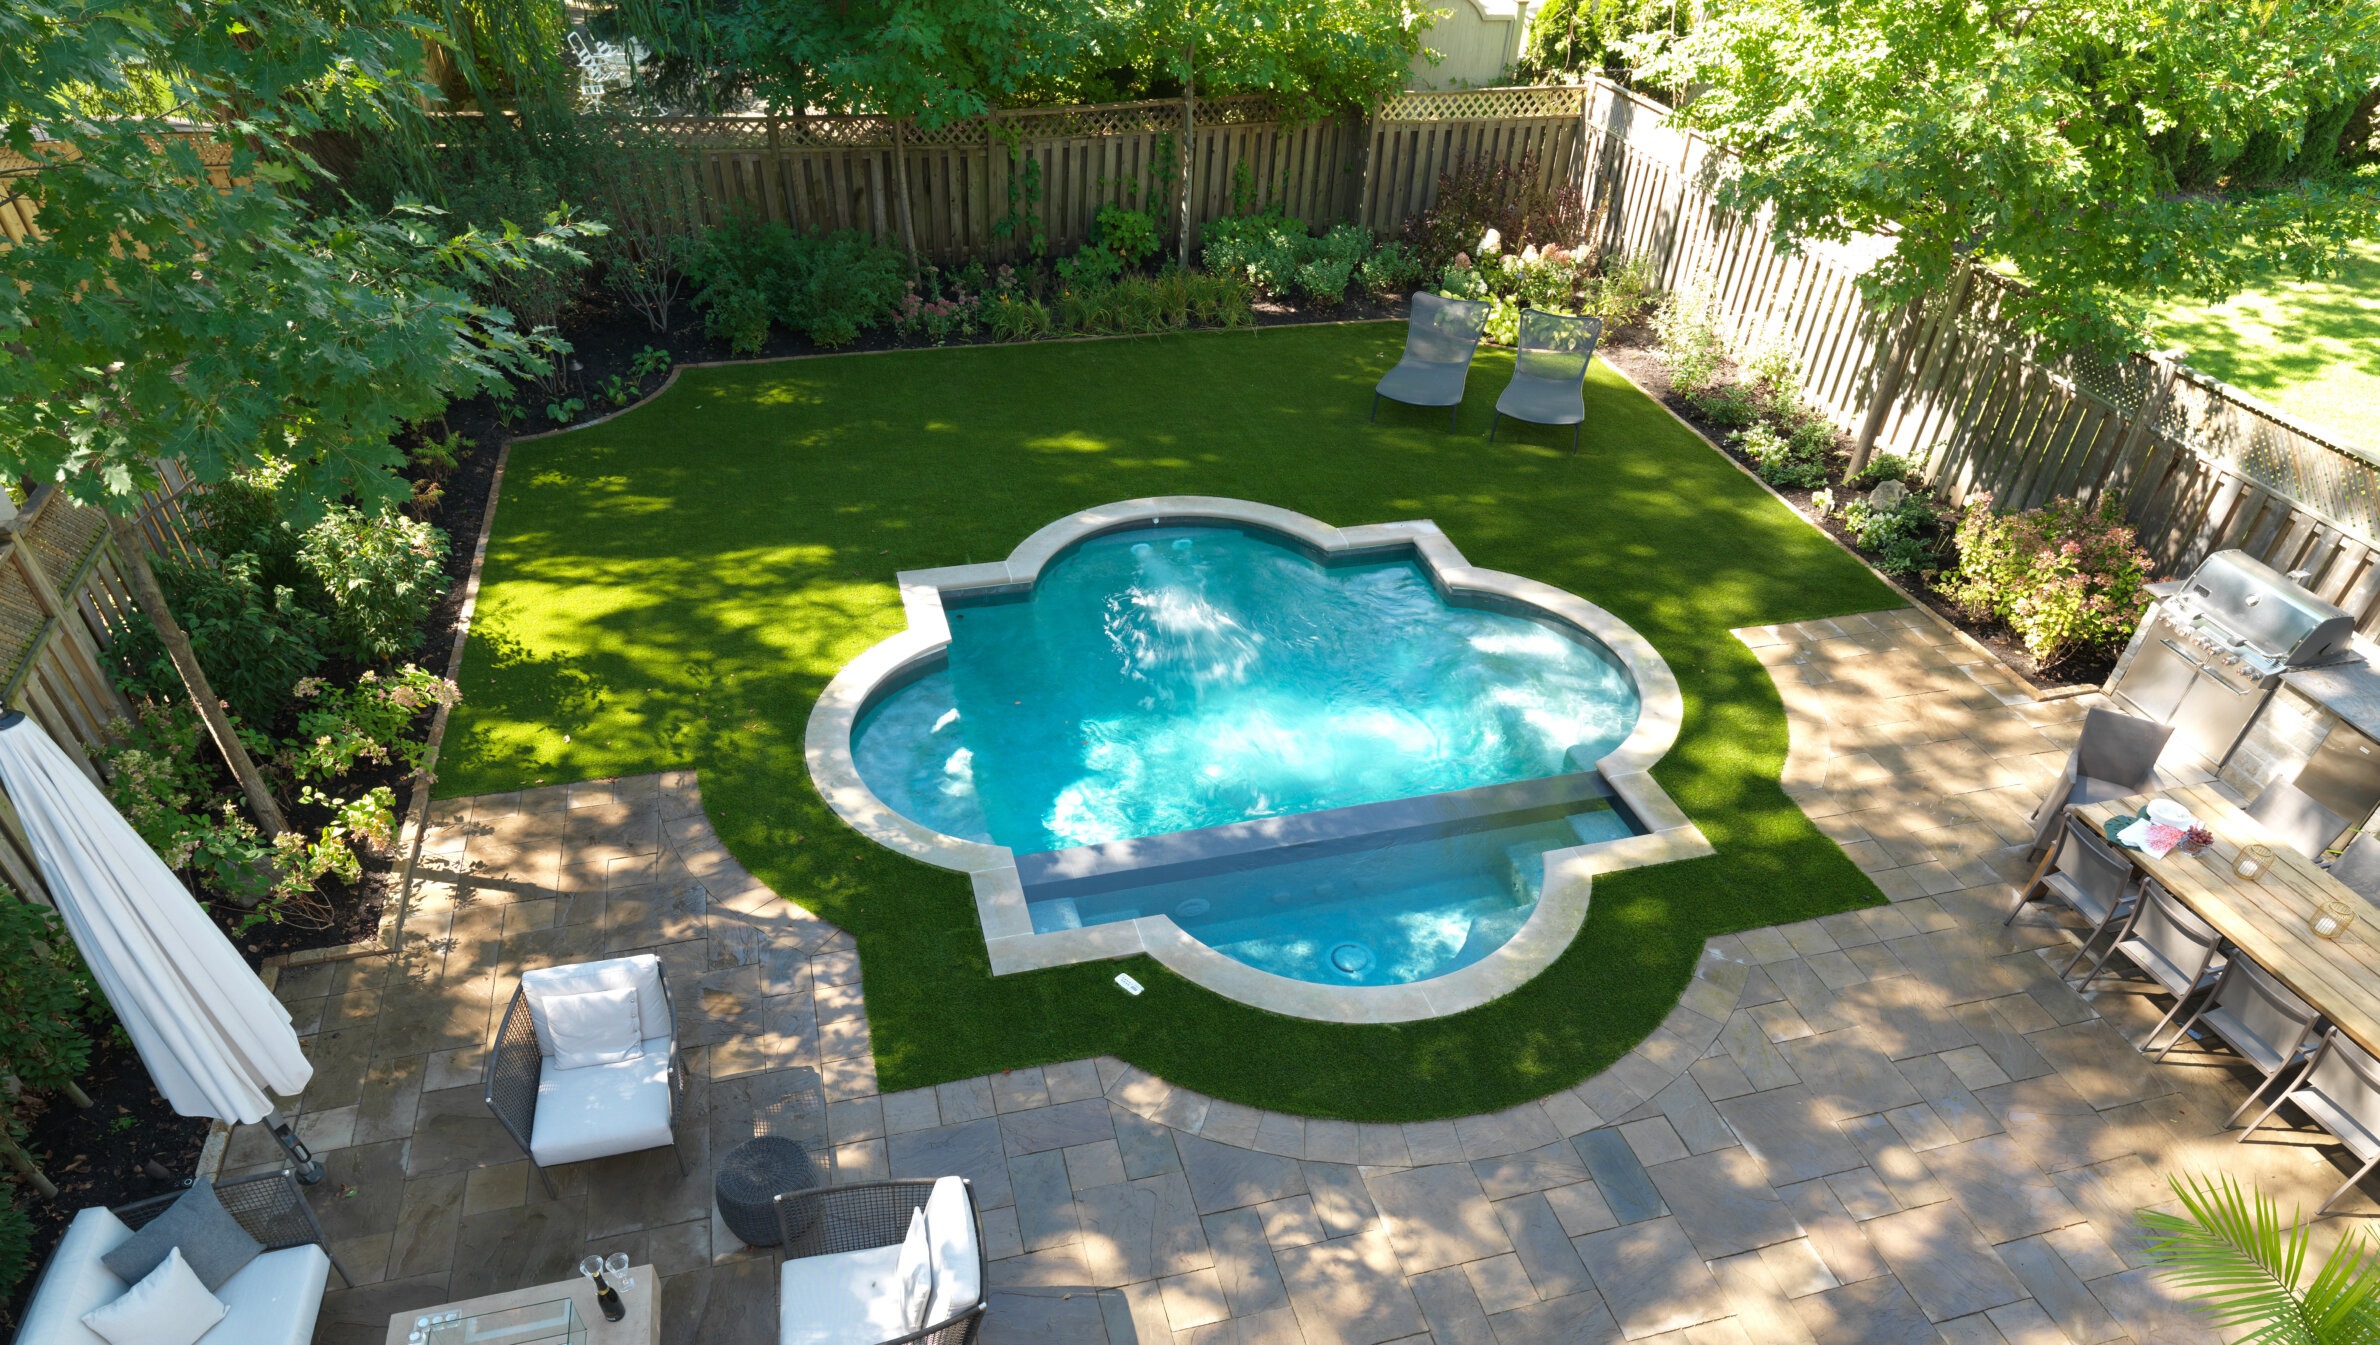 An aerial view of a cozy backyard featuring a kidney-shaped swimming pool, artificial turf, patio furniture, BBQ grill, and lush landscaping.